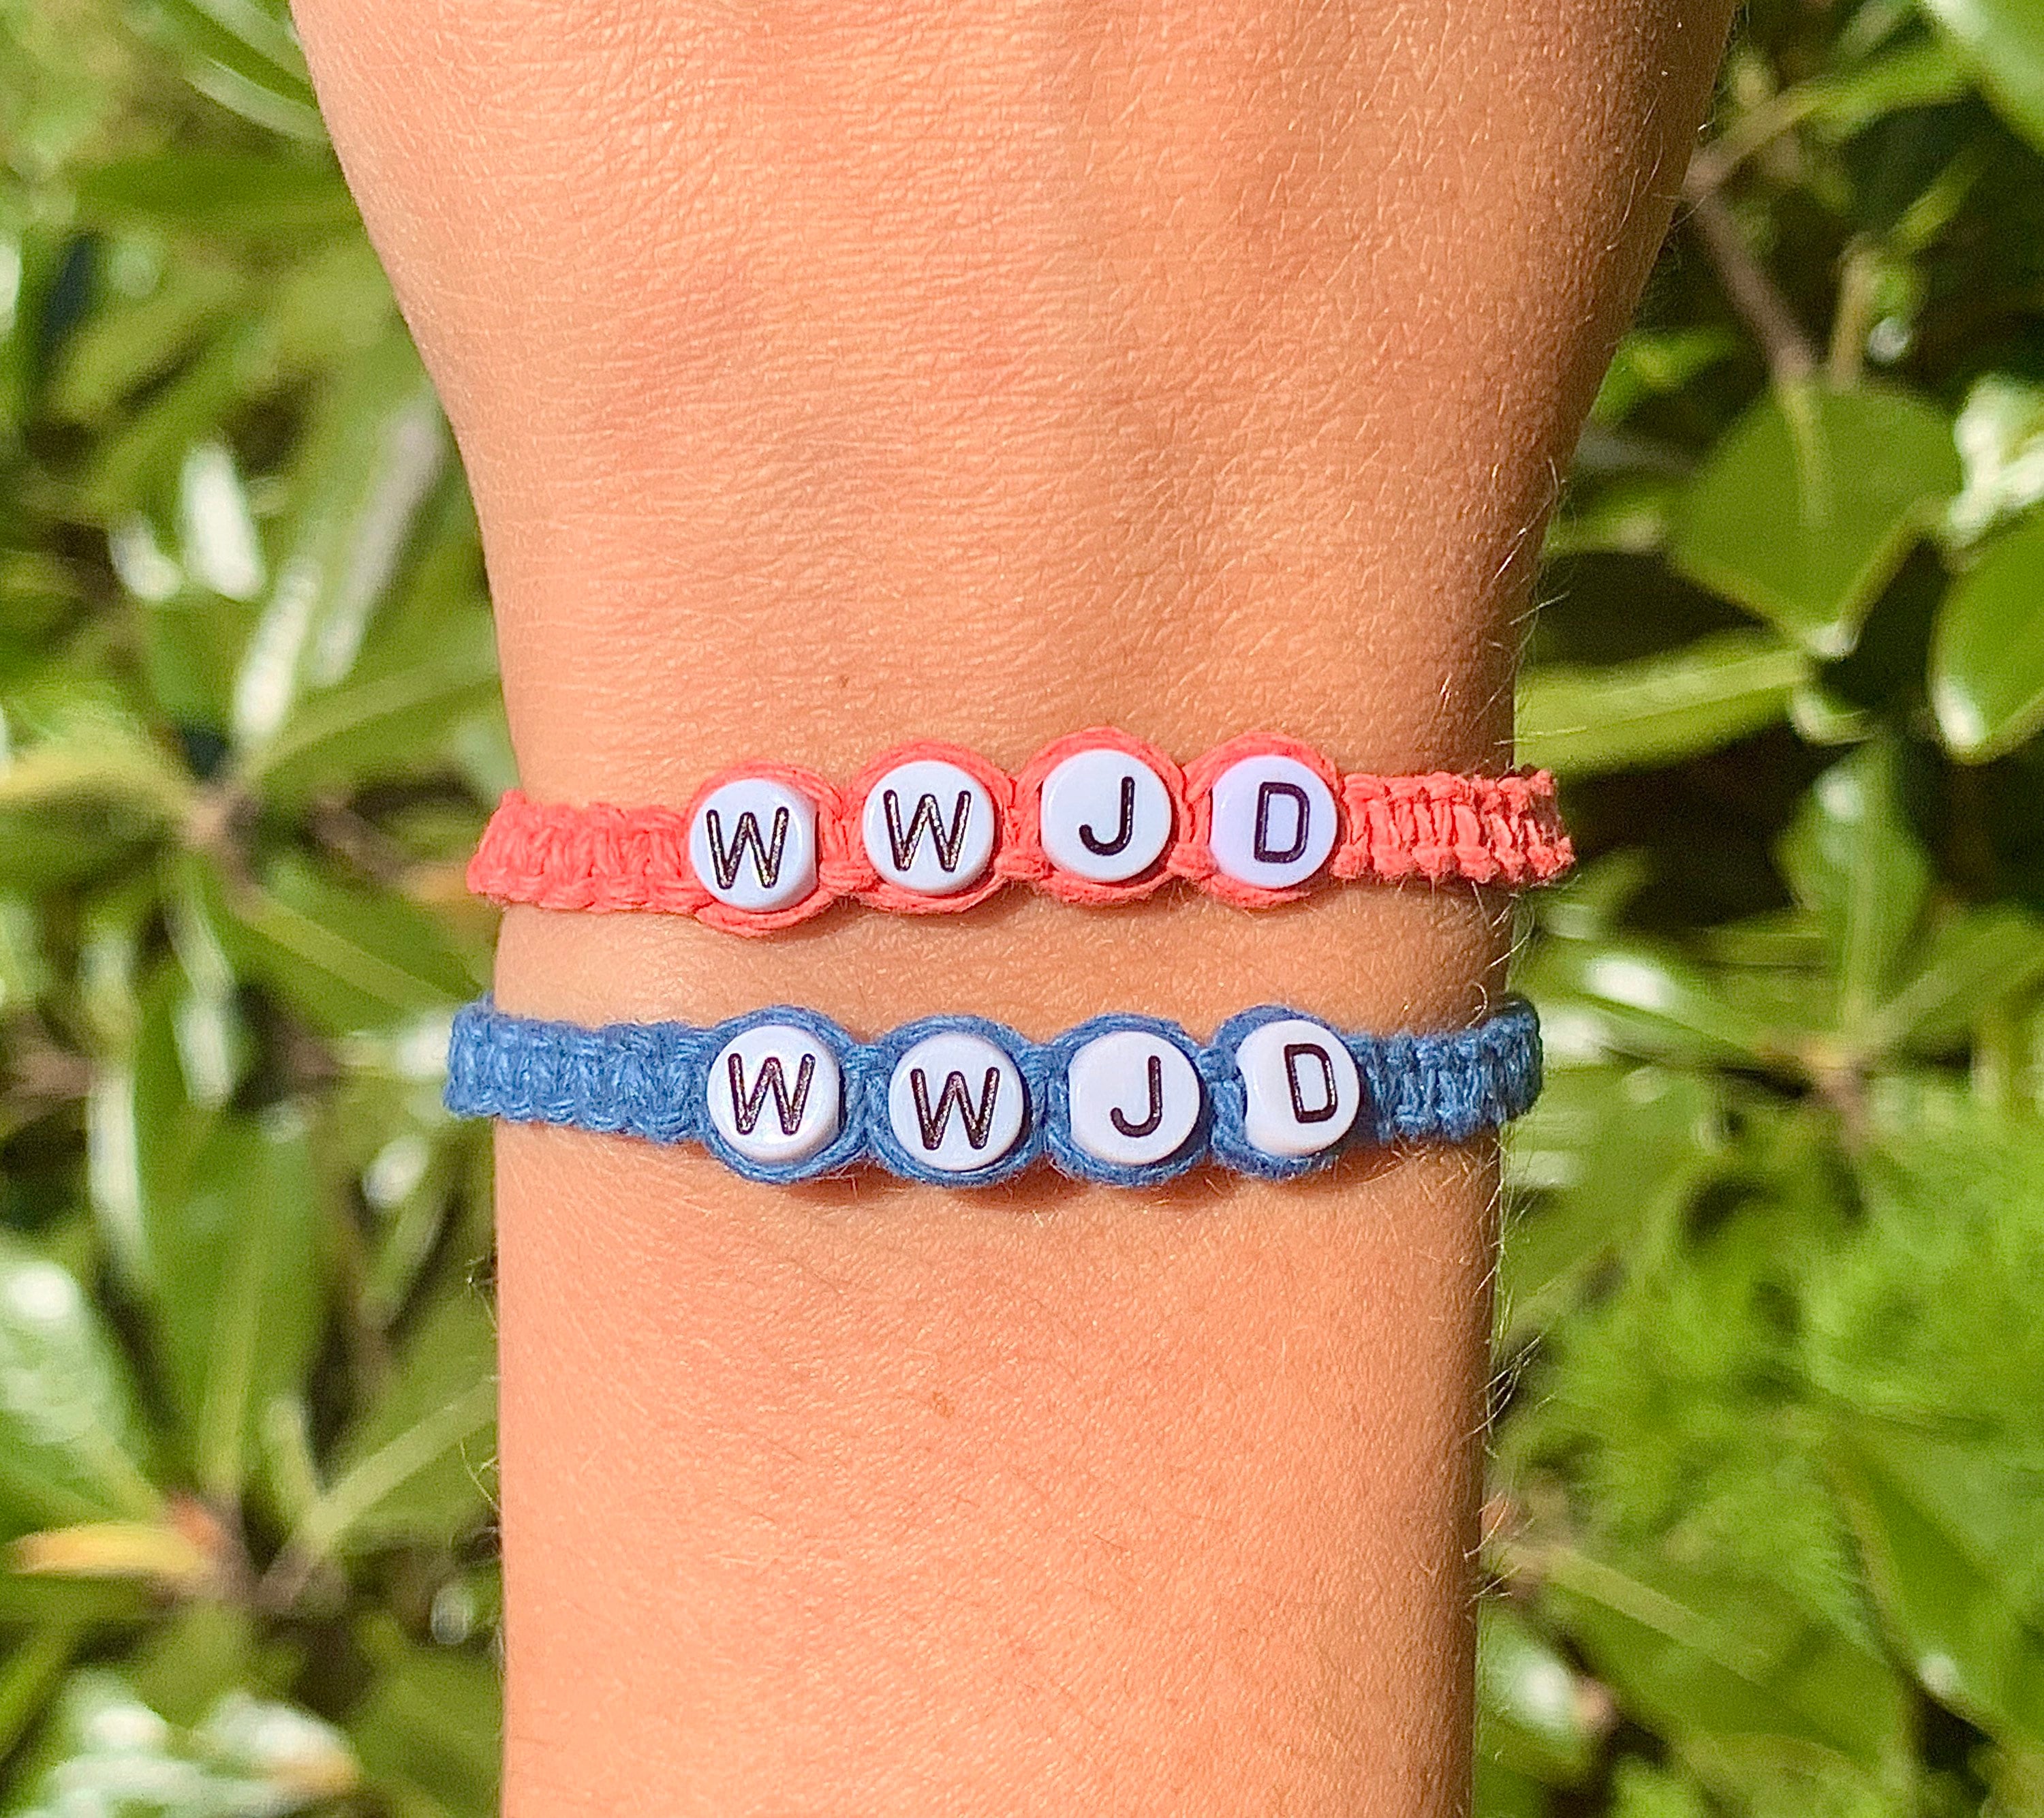 25 WWJD What Would Jesus Do Woven Bracelet Wristband New Colors Bulk Lot  Christian Religious Jewelry Genuine Quality US Seller Prayer Bands - Etsy